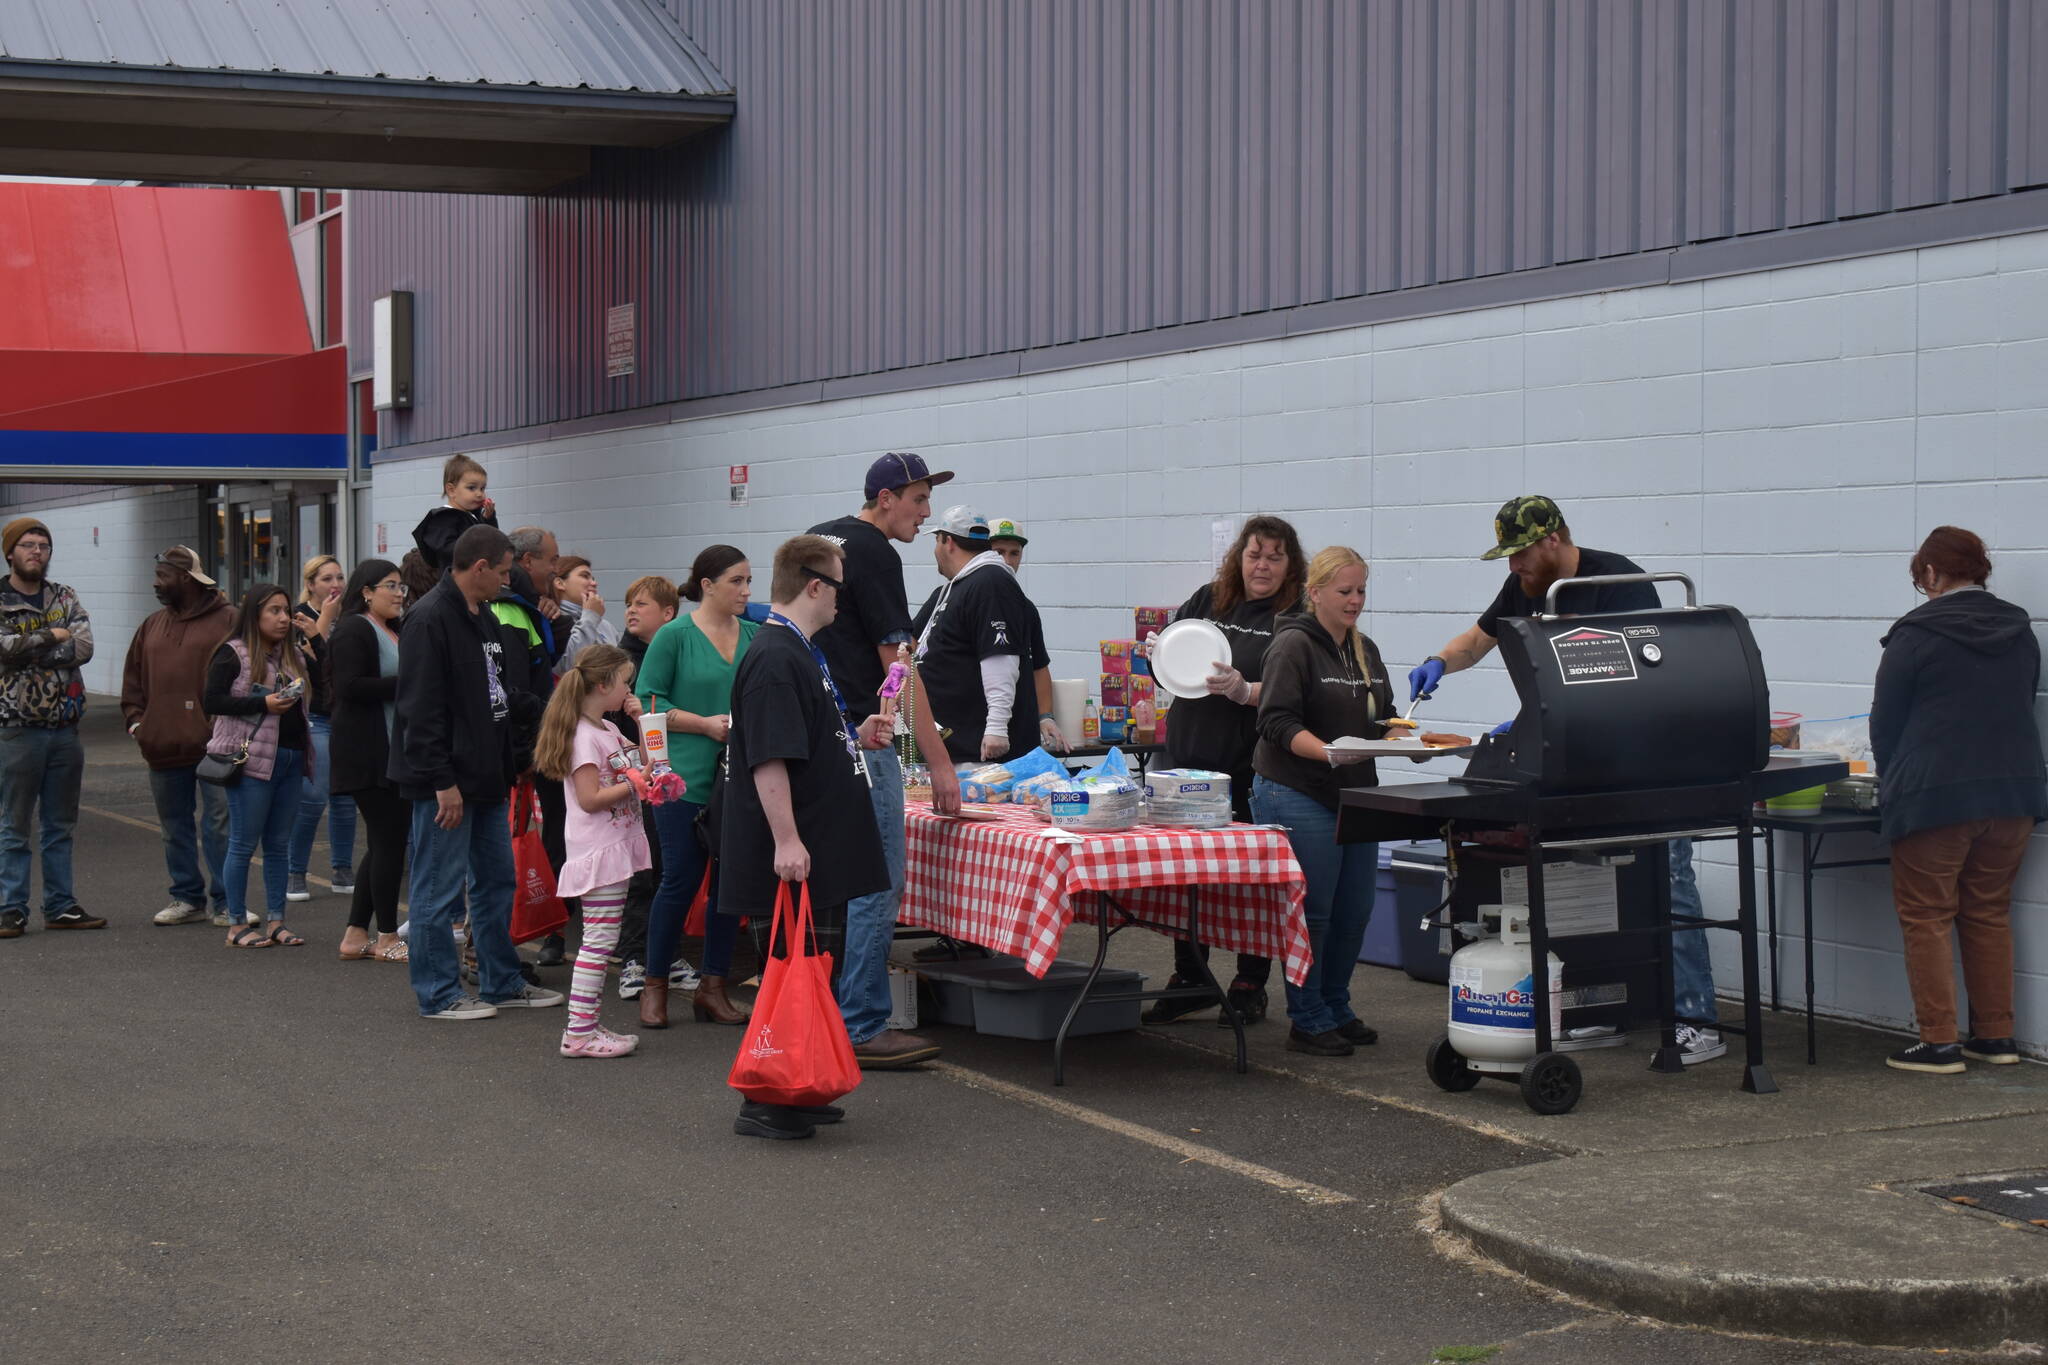 Allen Leister | The Daily World
Free food was provided to the more than 100 people who attended the first annual Overdose Awareness Day event on Aug. 31, 2022, in Aberdeen. Free T-shirts, giveaways, and entertainment for children produced an enjoyable family-friendly environment.